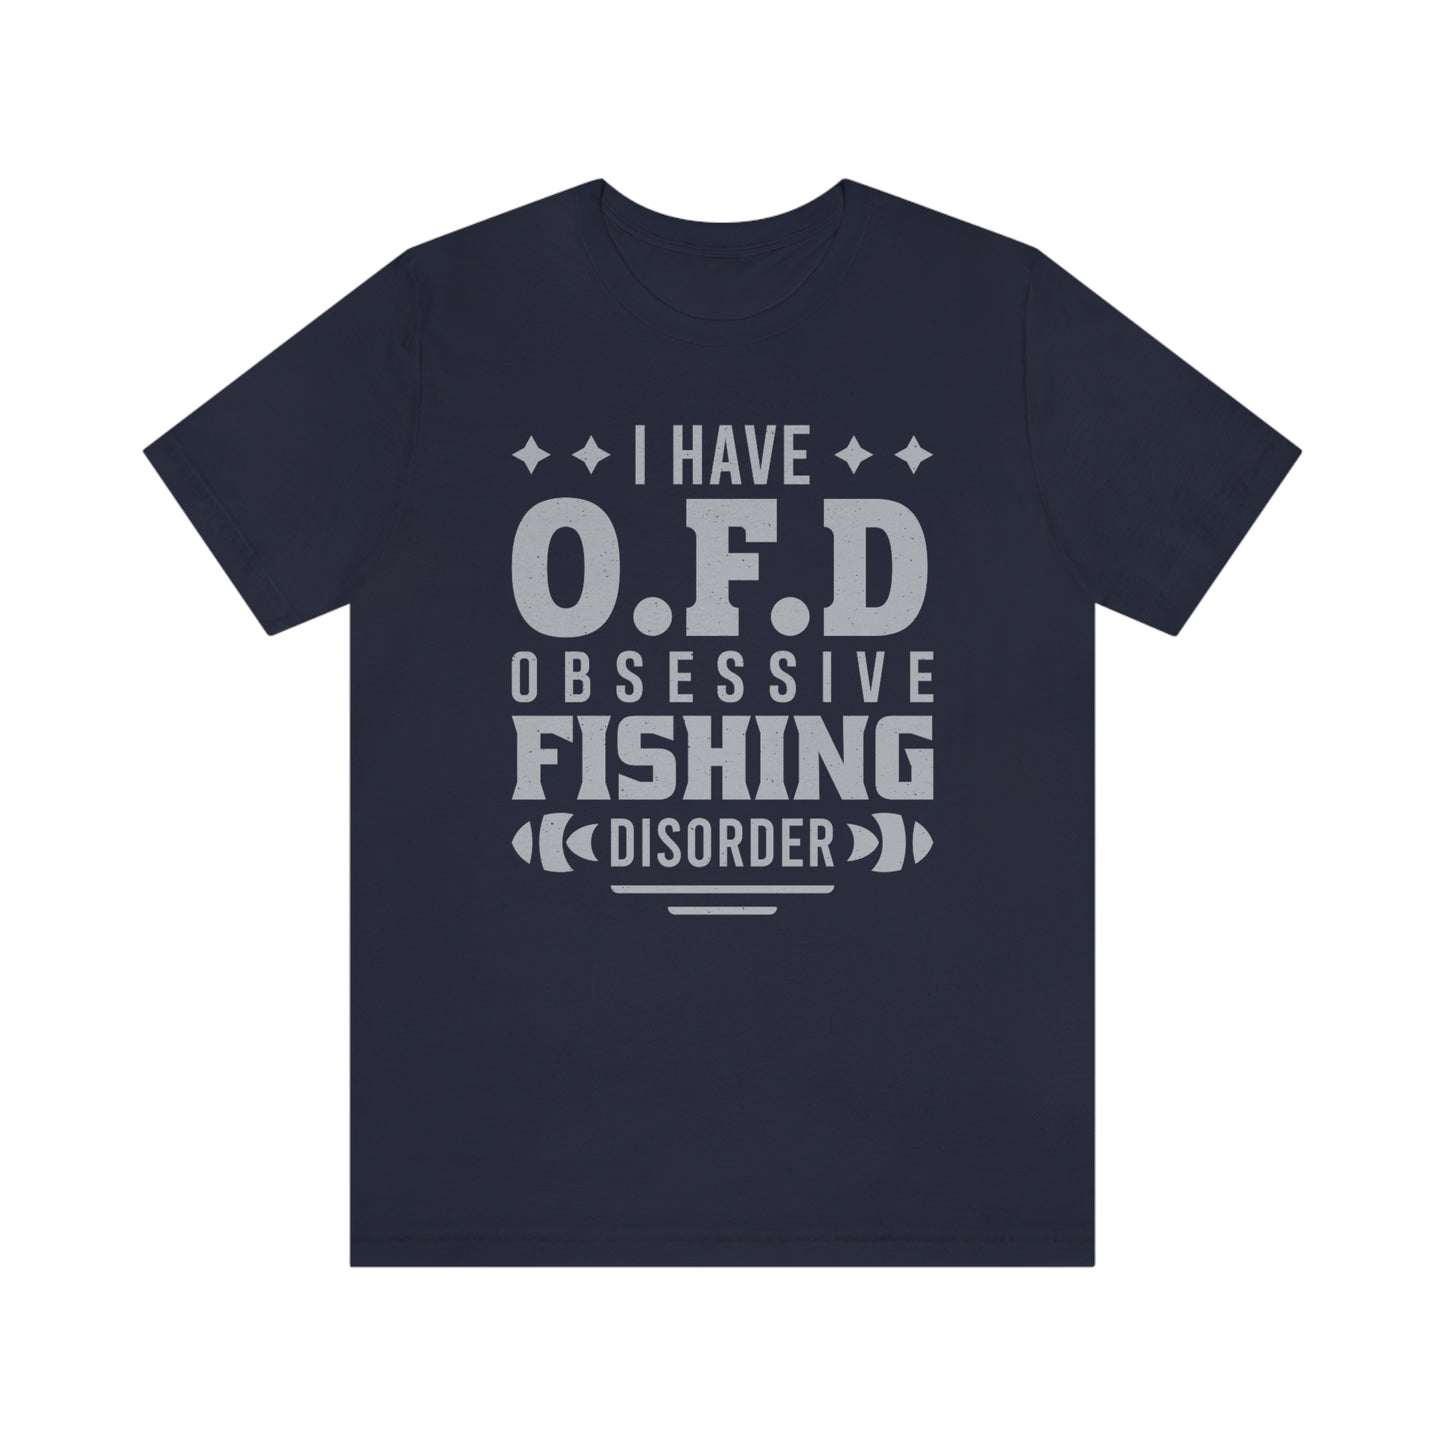 I Have OFD - Obsessive Fishing Disorder - gift t-shirt for Fishing Lovers - 37 Design Unit